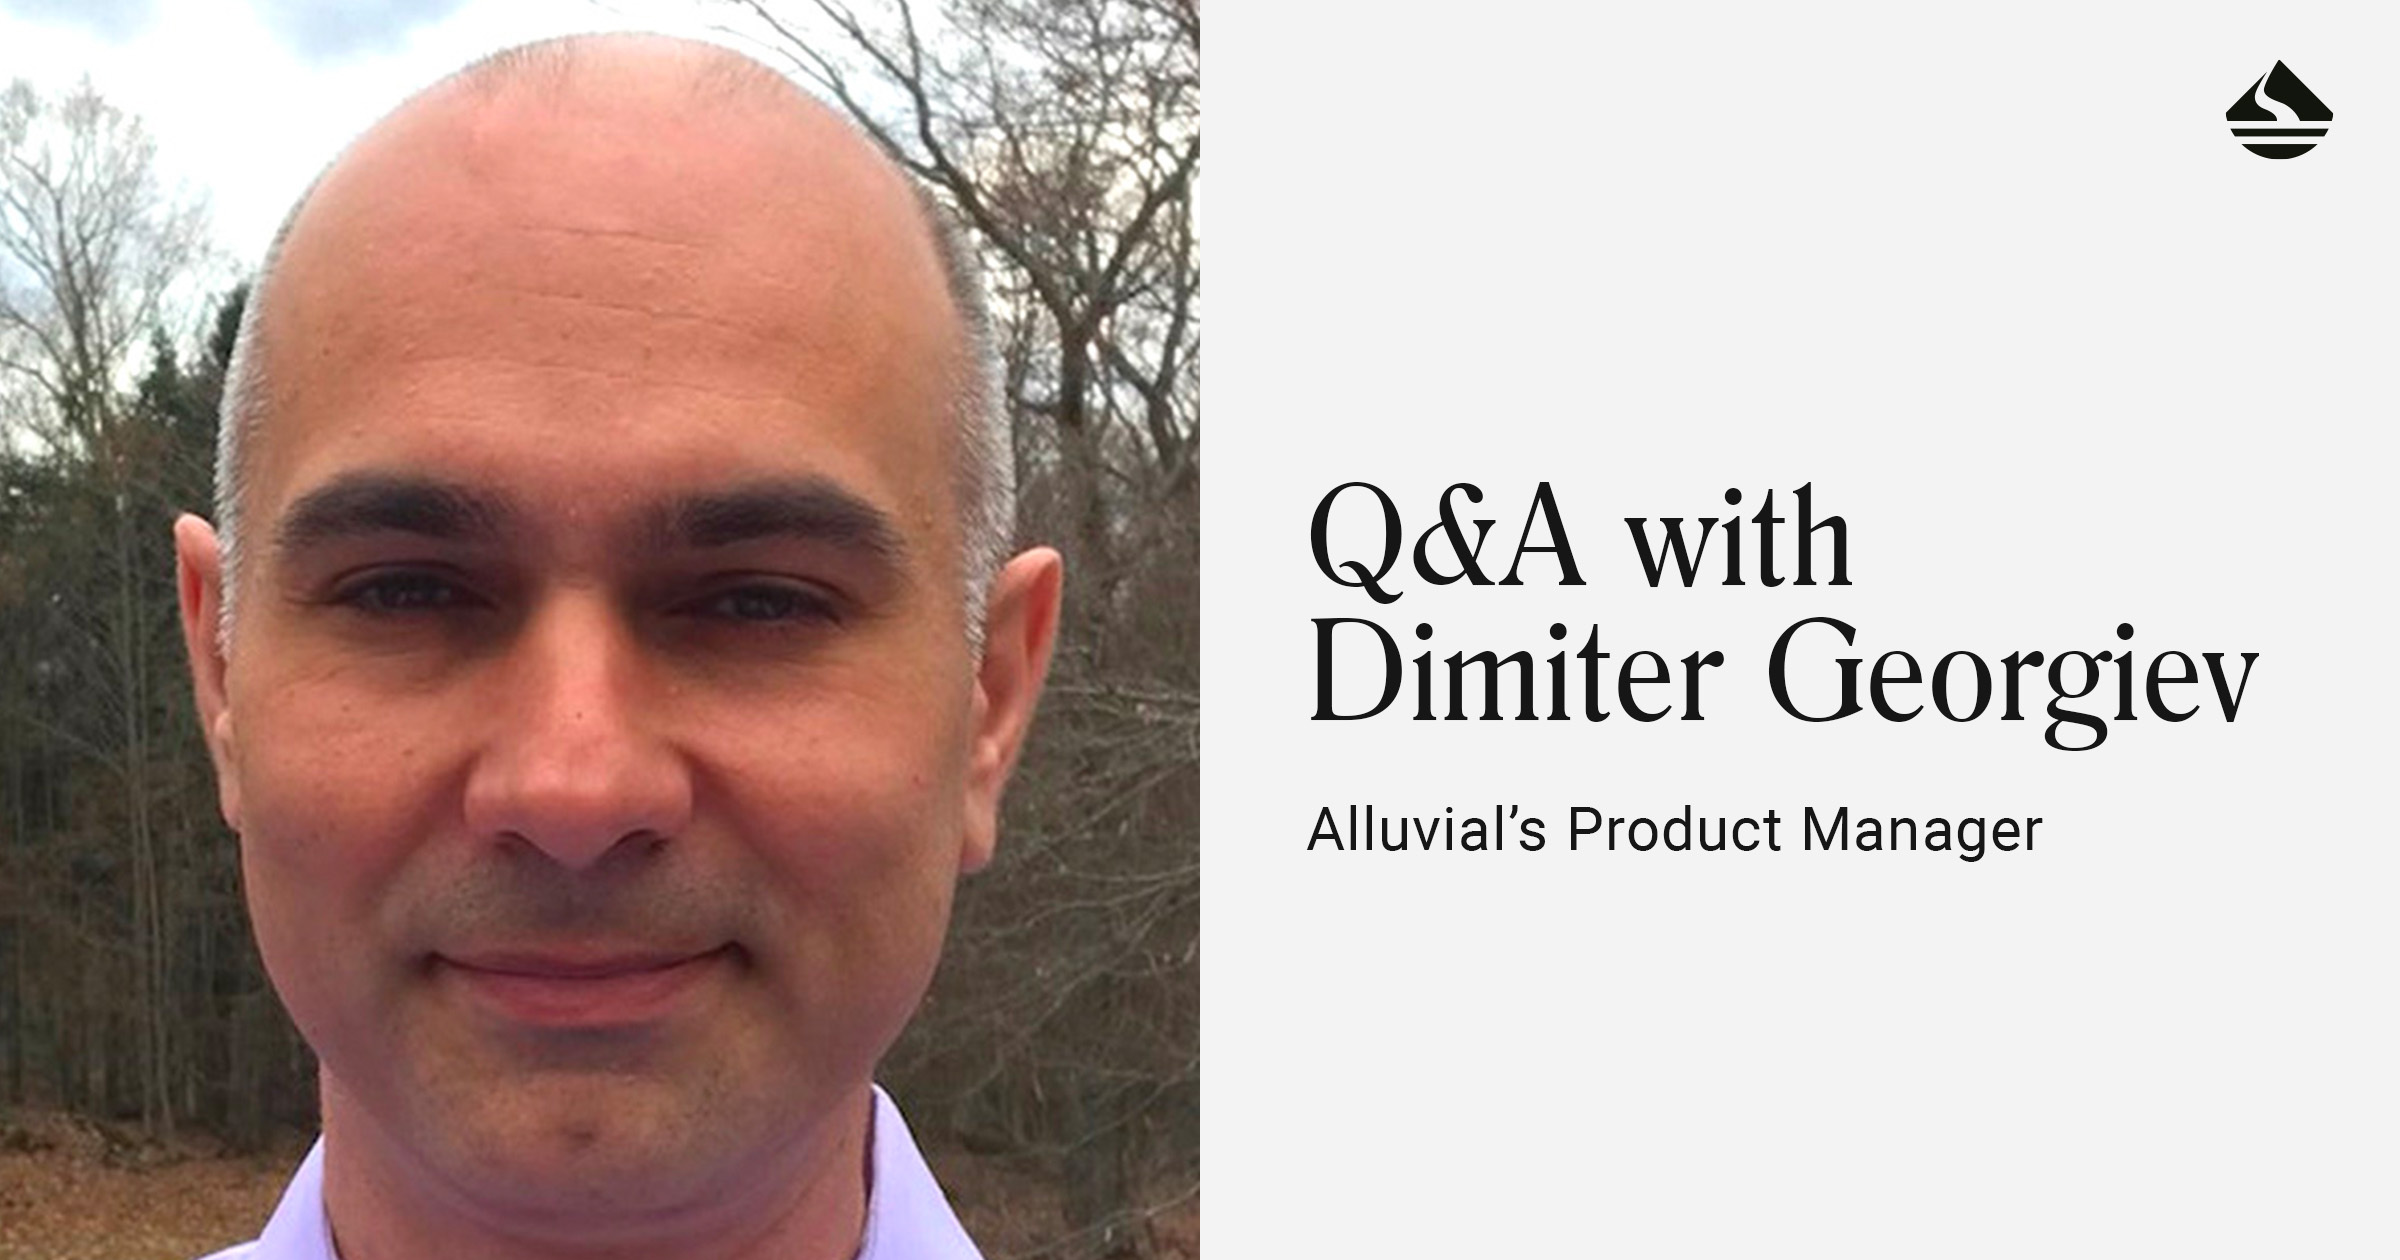 Q&A with Dimiter Georgiev, Alluvial's Product Manager